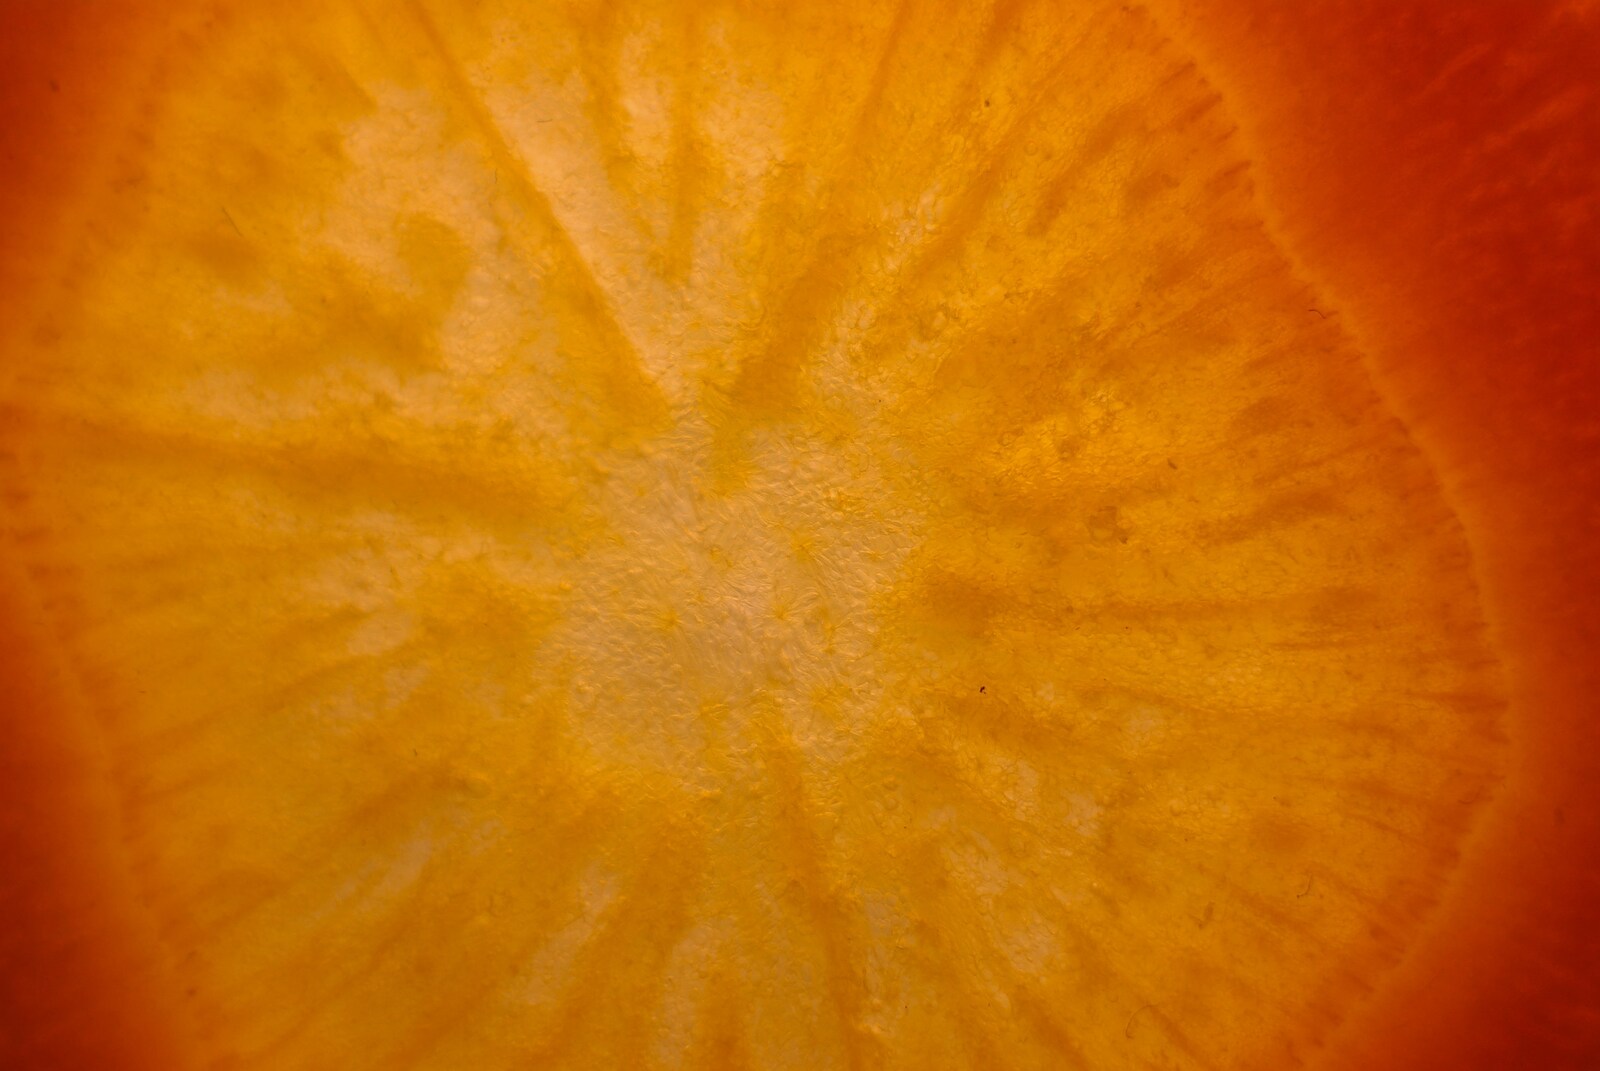 A close-up of a slice of carrot from Aldeburgh, Sprogs, and The BBs at Stoke by Nayland, Suffolk - 10th February 2008